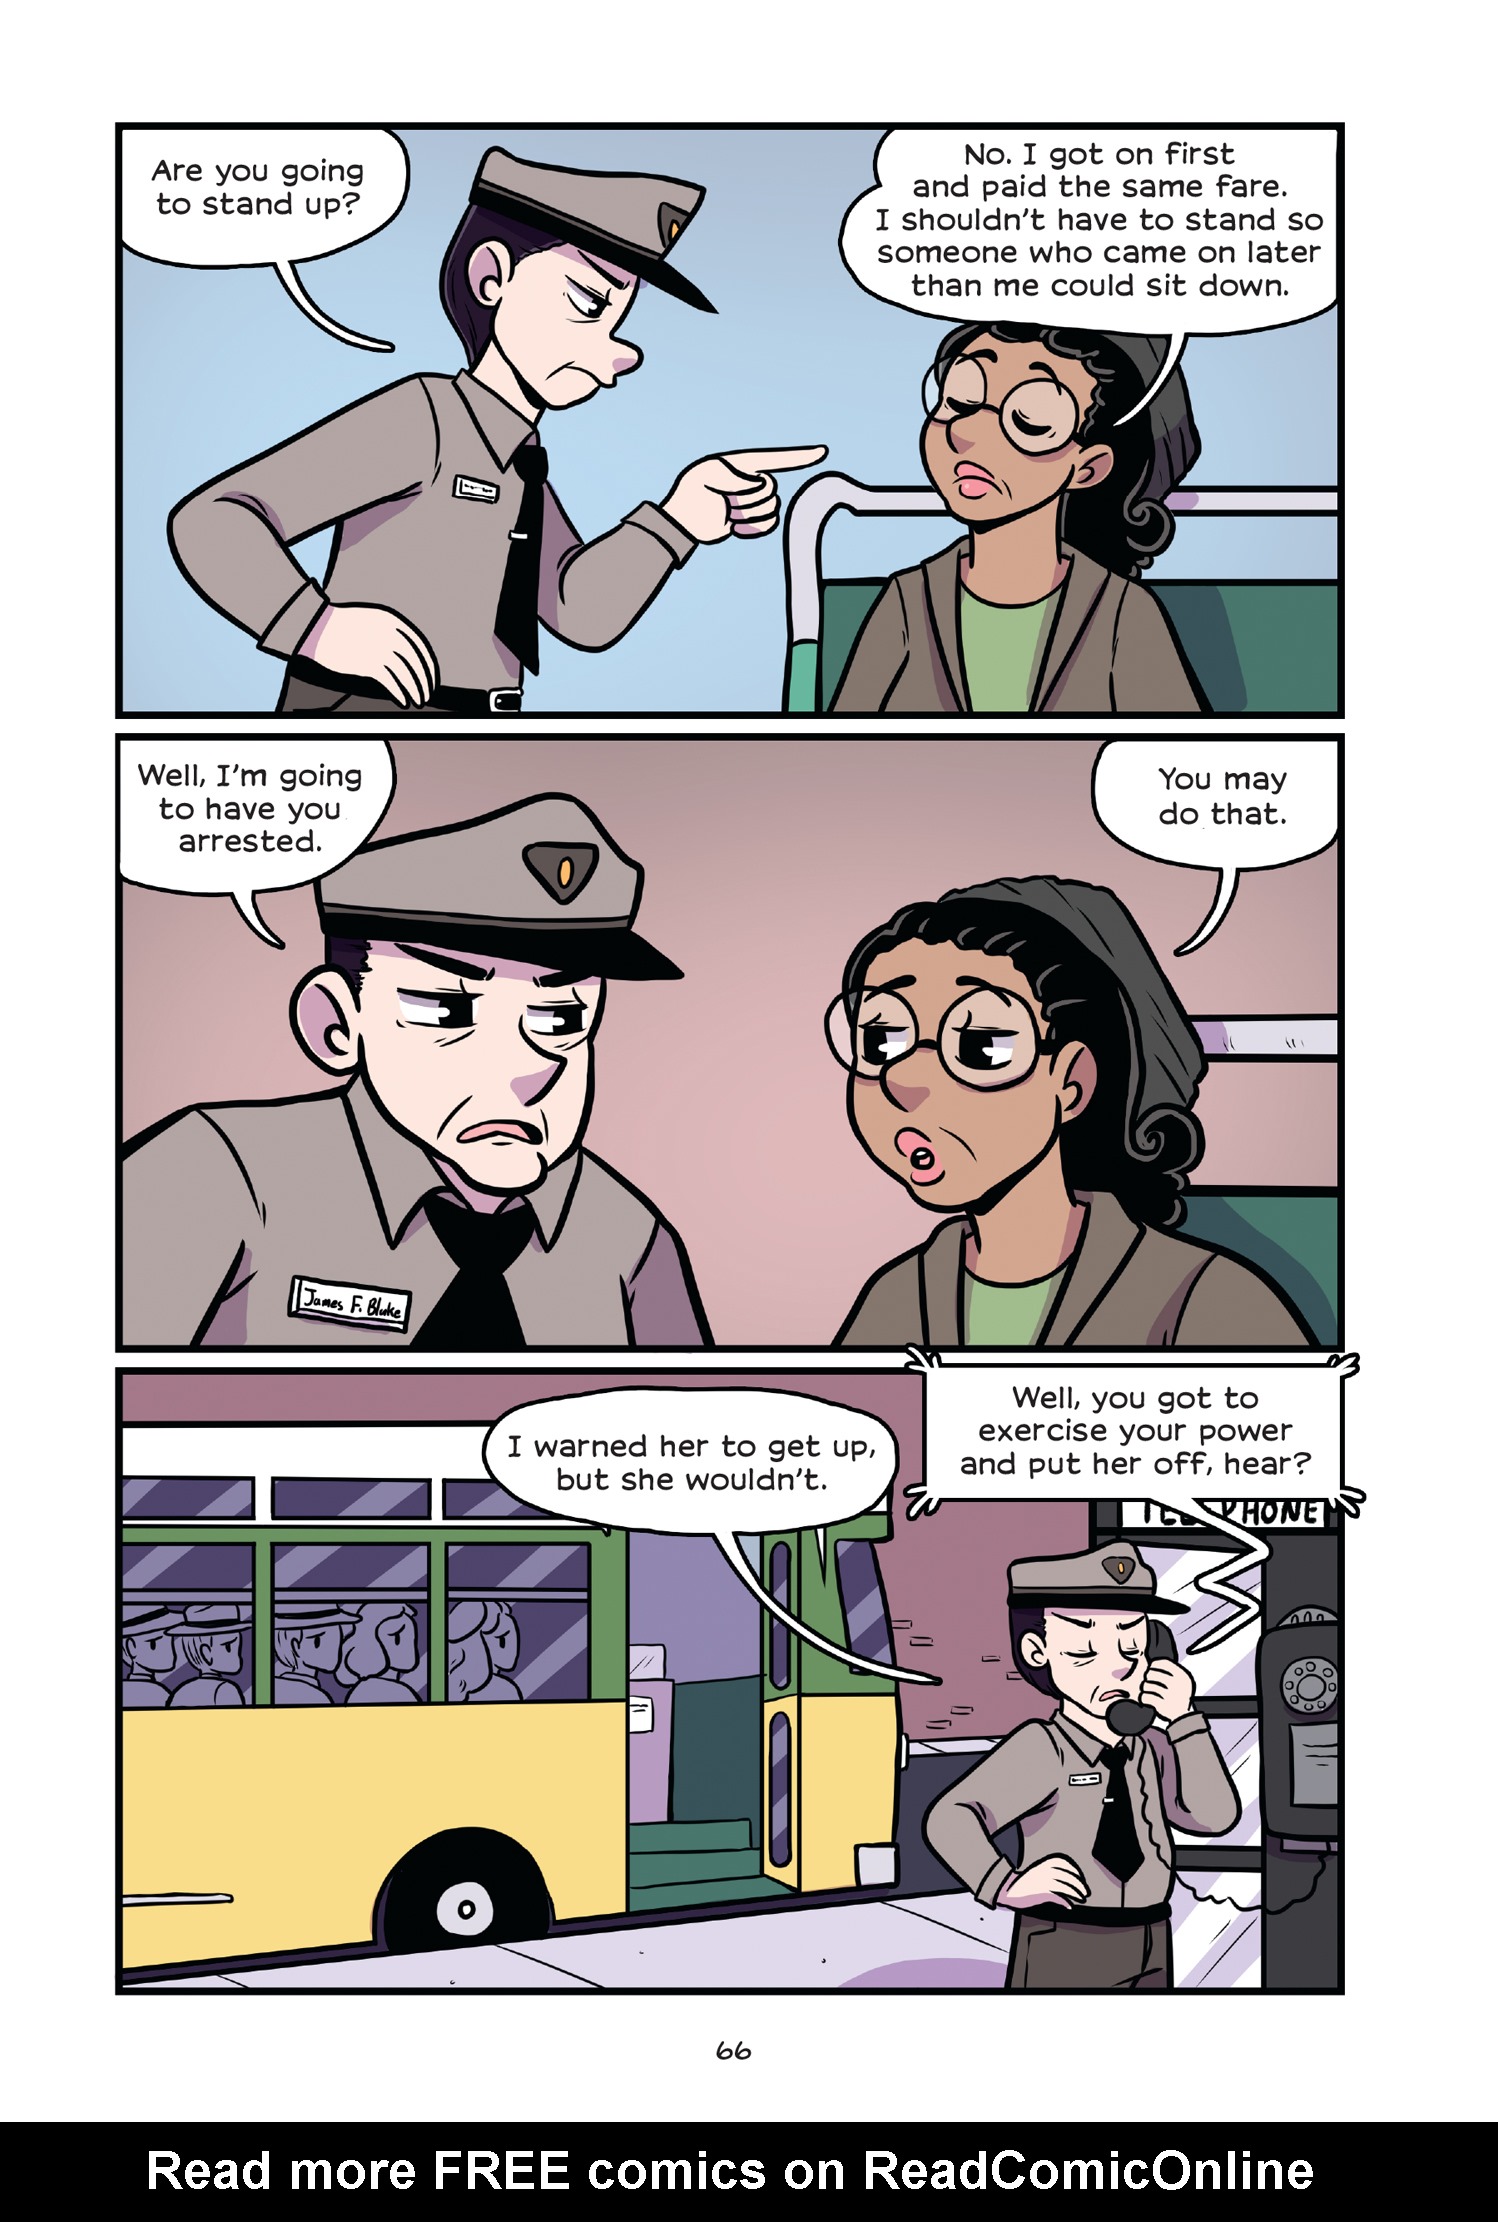 Read online History Comics comic -  Issue # Rosa Parks & Claudette Colvin - Civil Rights Heroes - 71